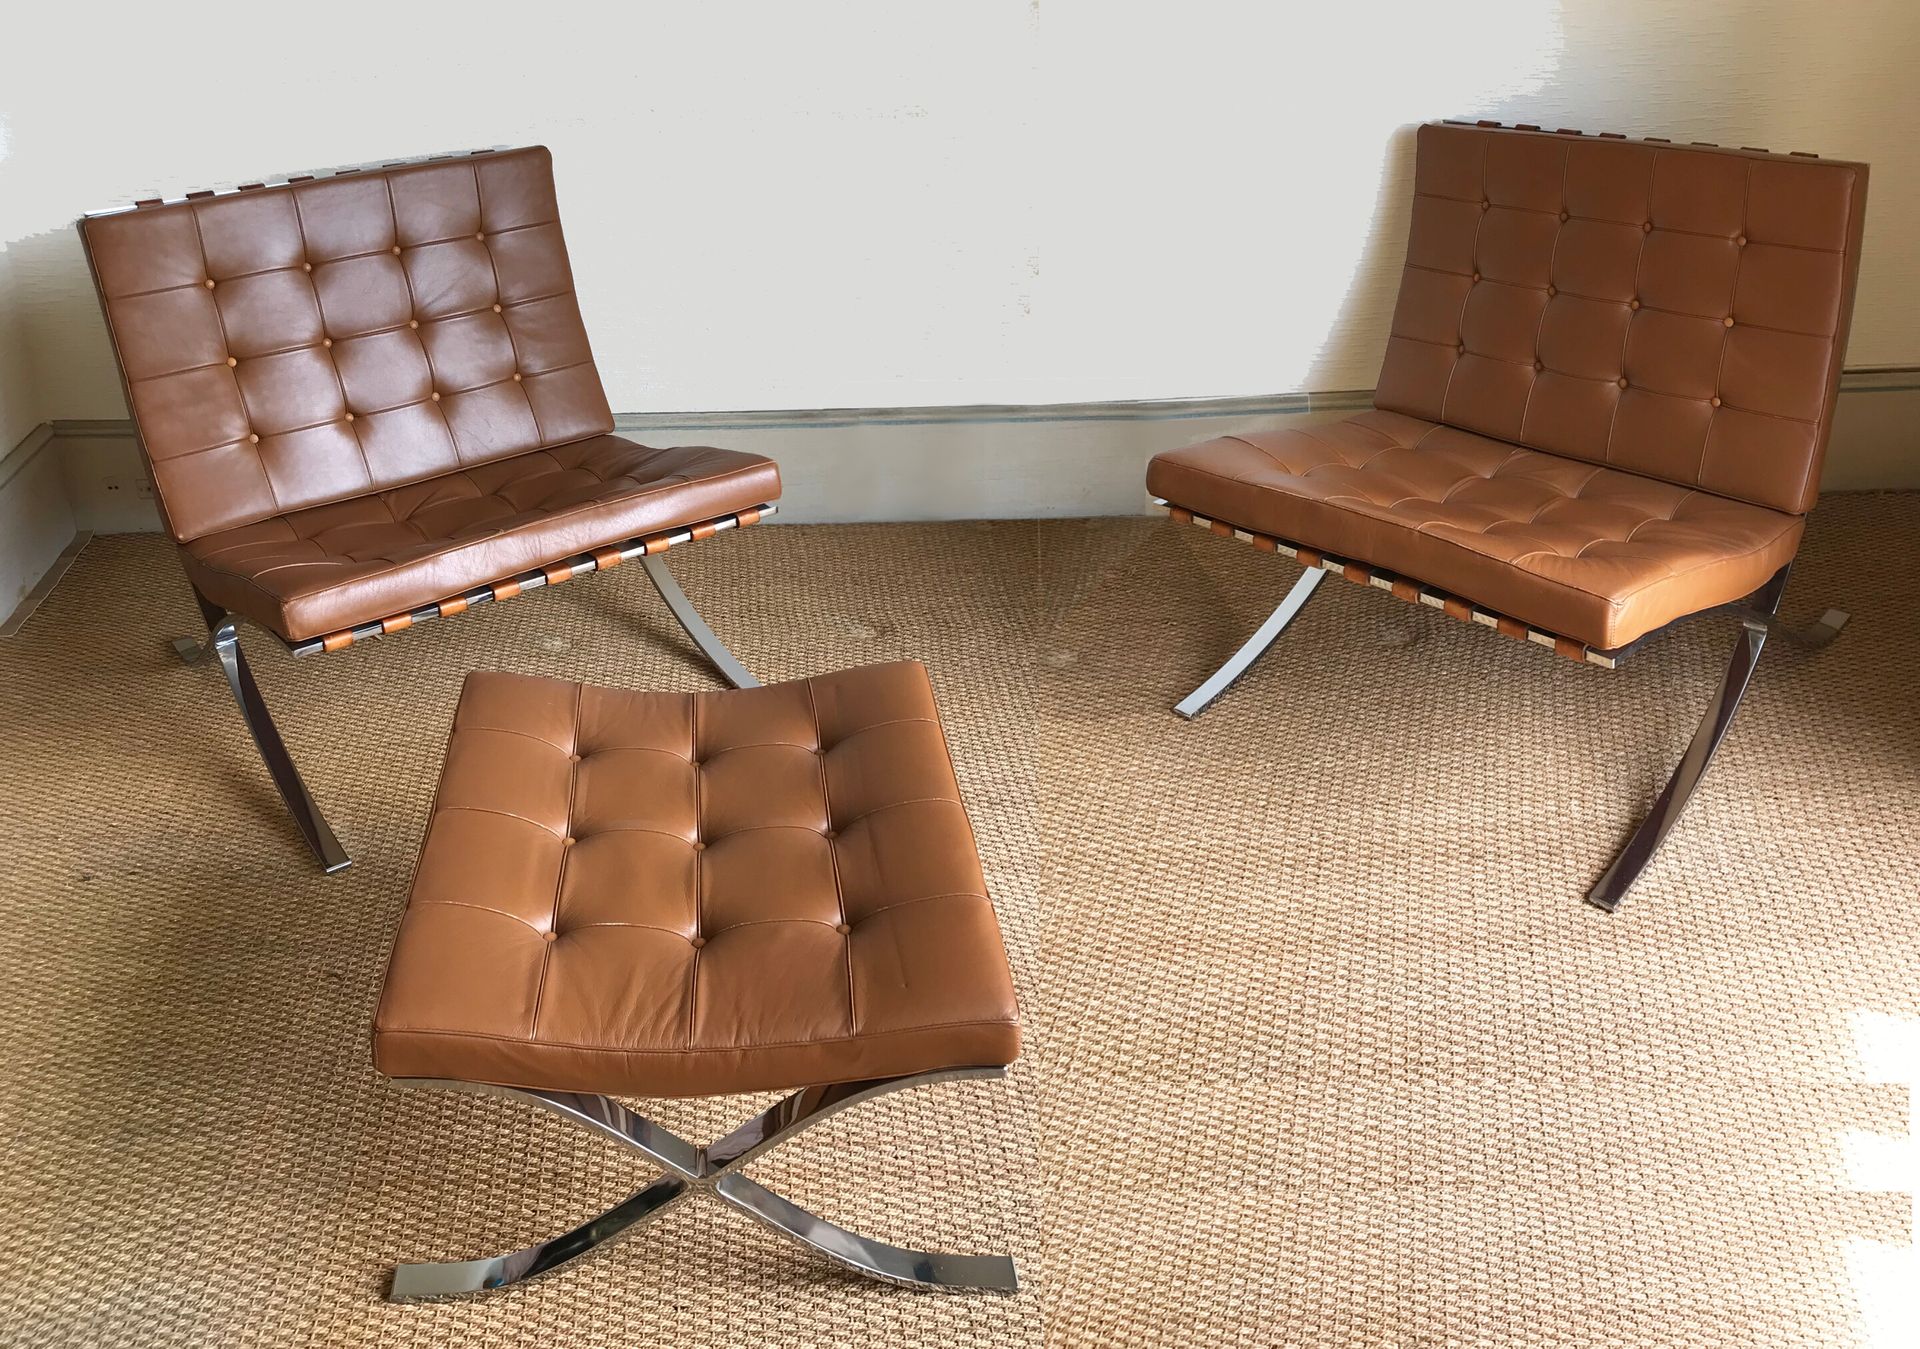 Mies VAN DER ROHE After Mies van der ROHE & KNOLL - 1980s / 1990s

Pair of armch&hellip;